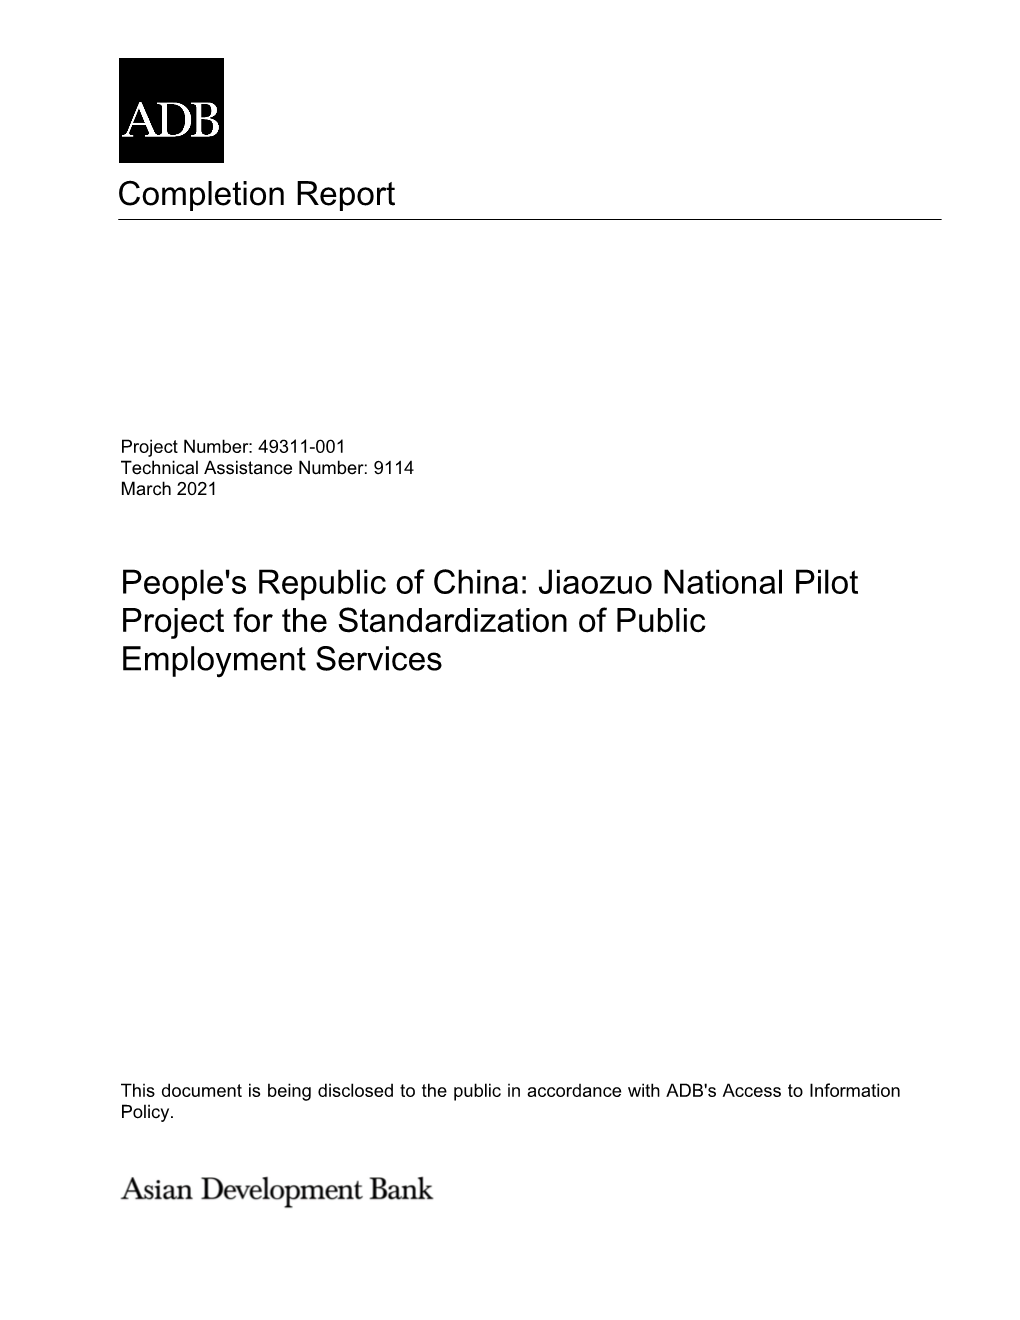 Jiaozuo National Pilot Project for the Standardization of Public Employment Services